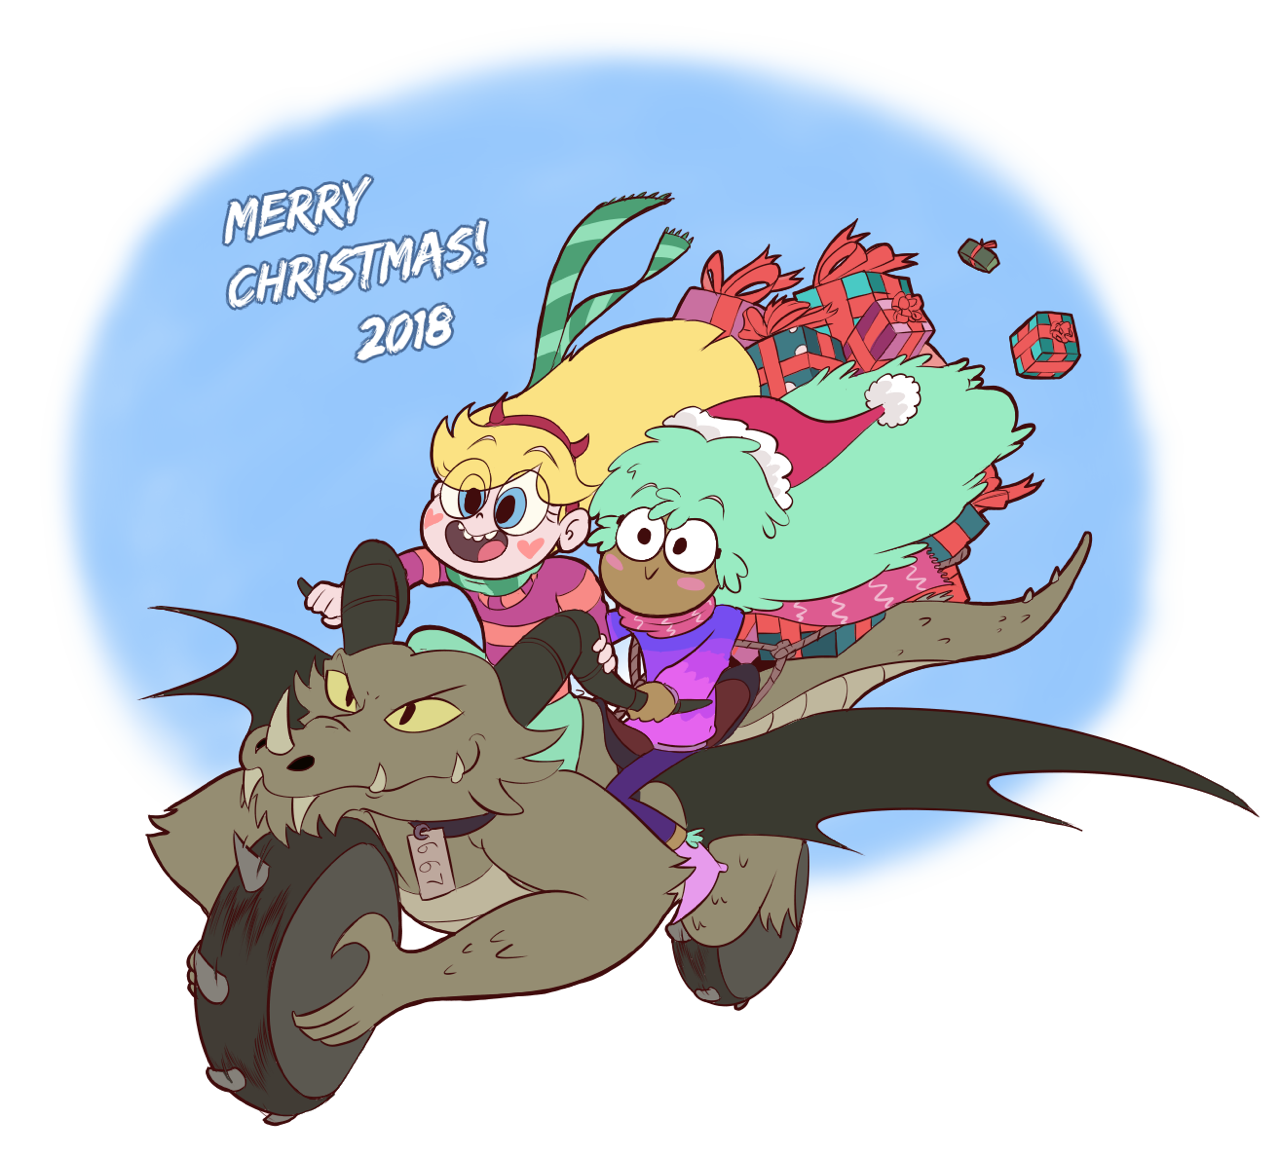 My gift for @doodlelue!I’m your secret santa, and Merry Christmas!